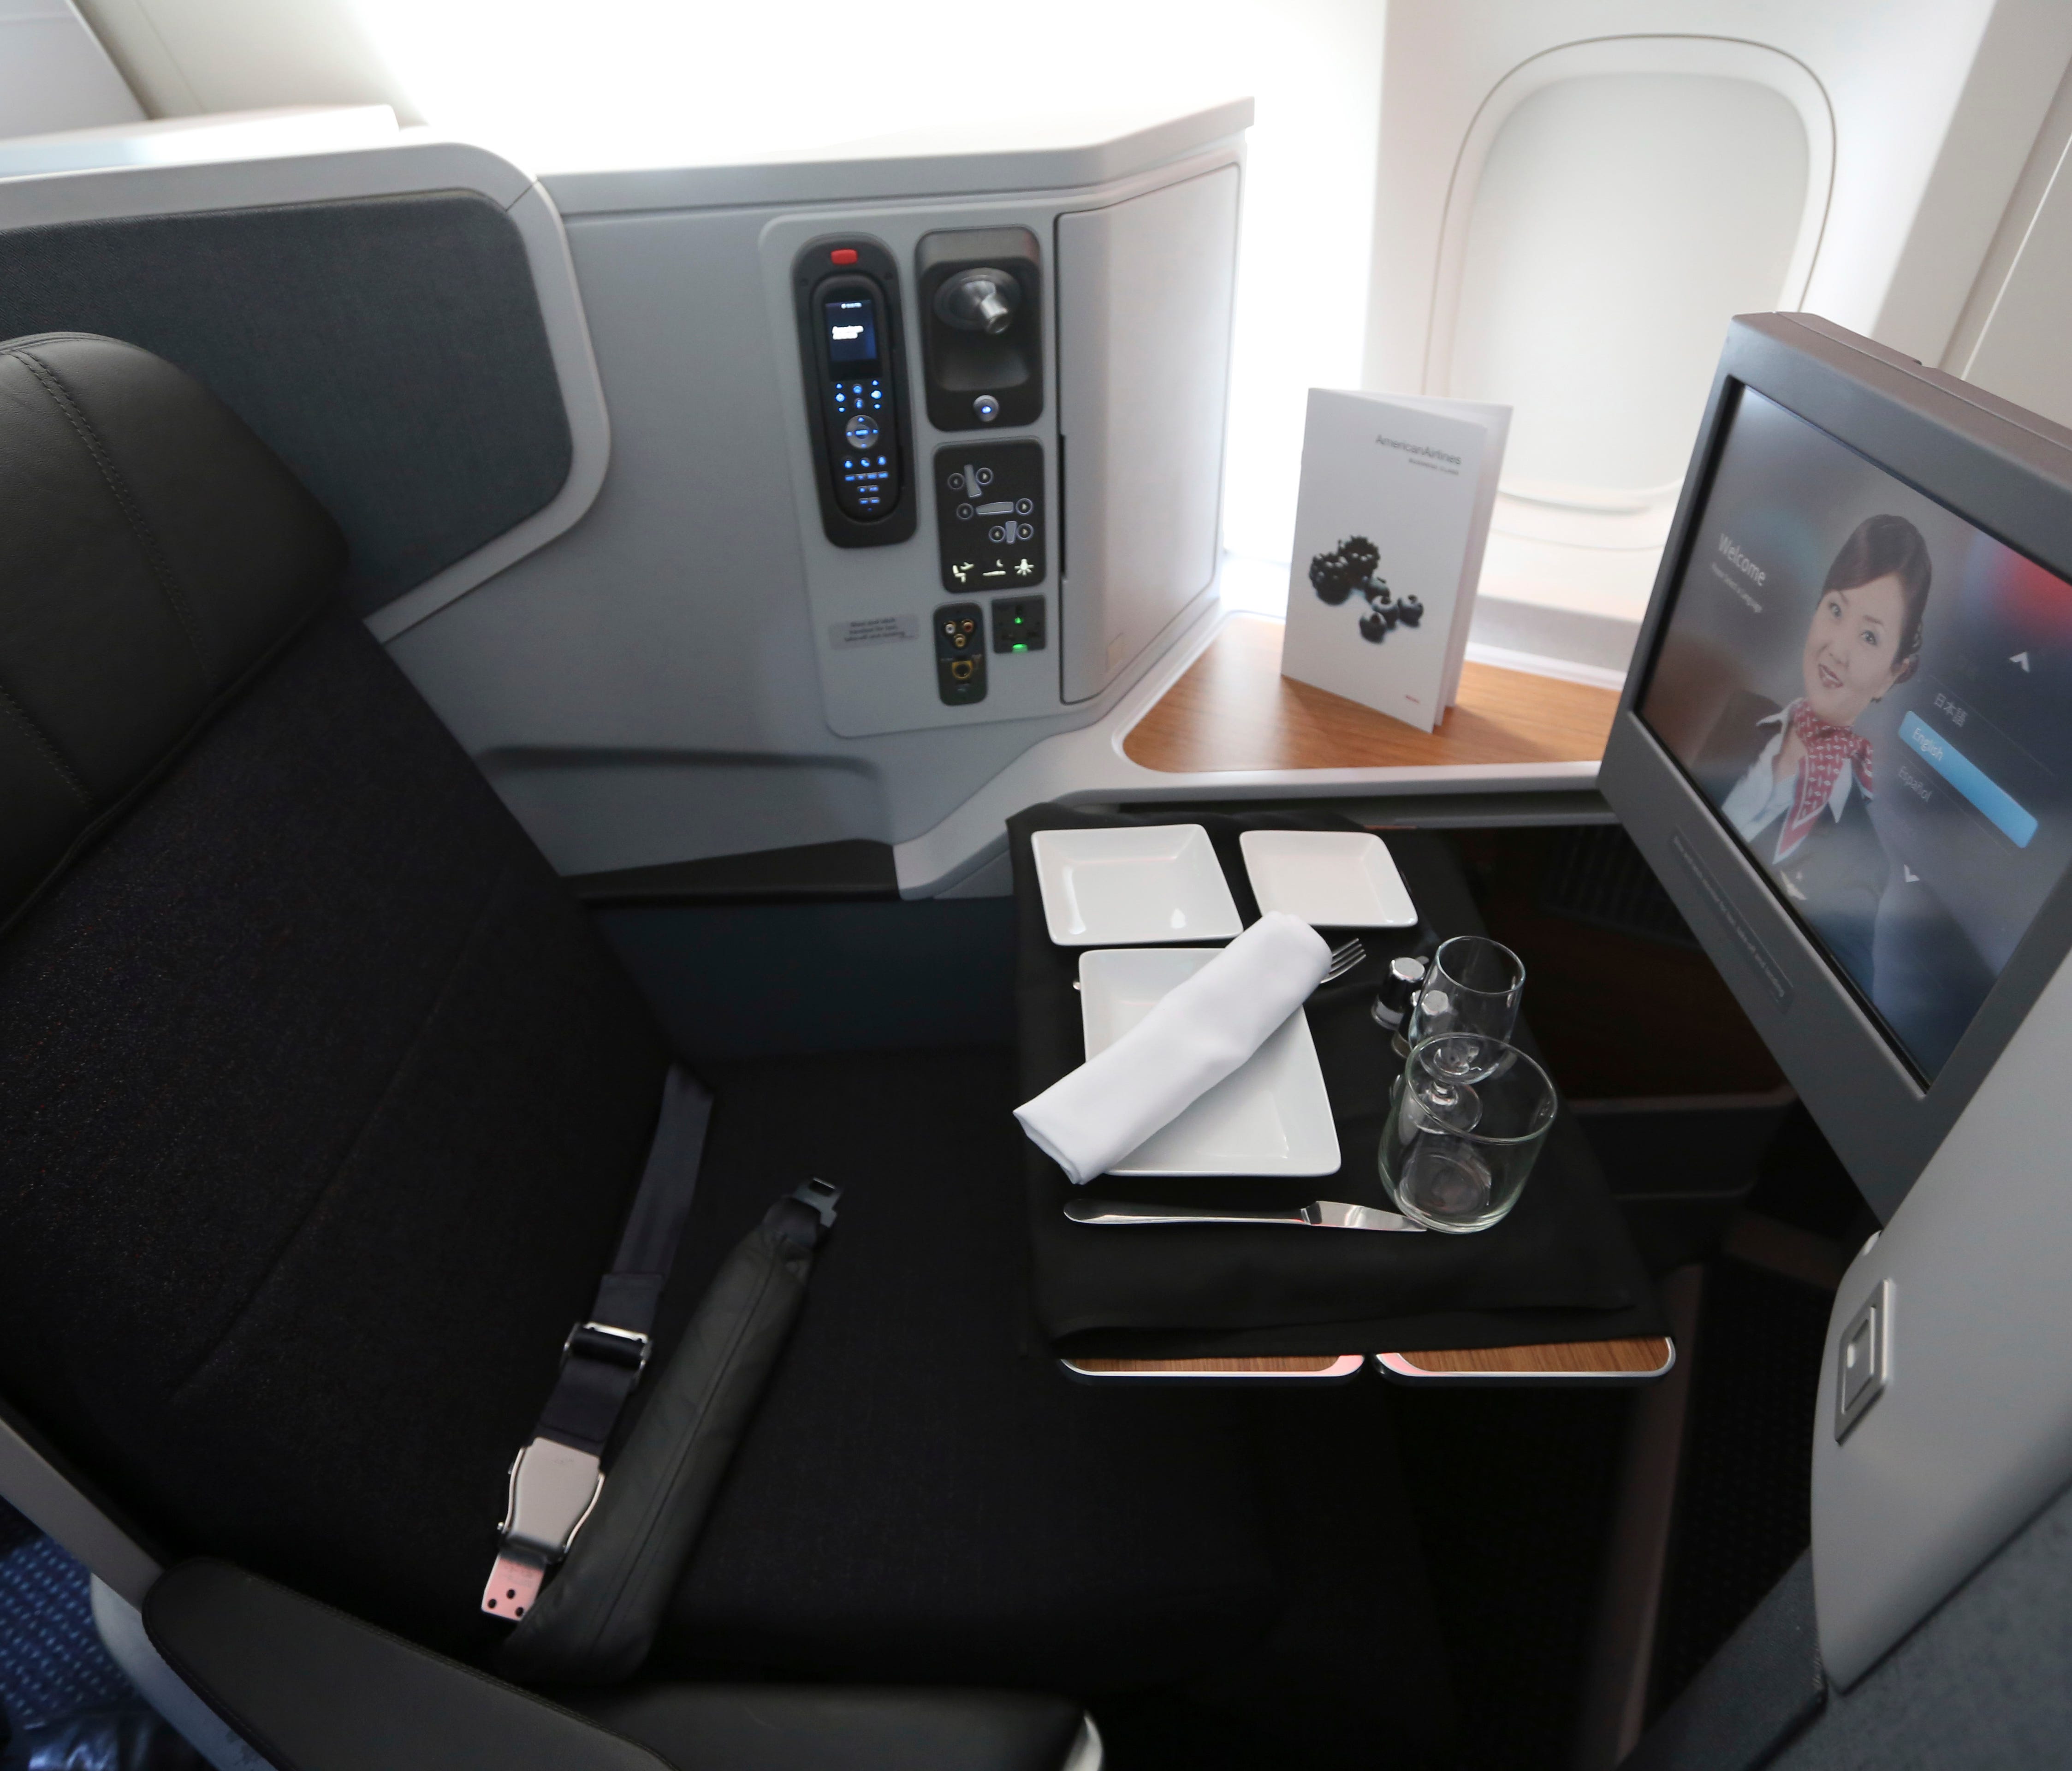 A first-class seat set up for a passenger's meal in an American Airlines Boeing 777-300ER.